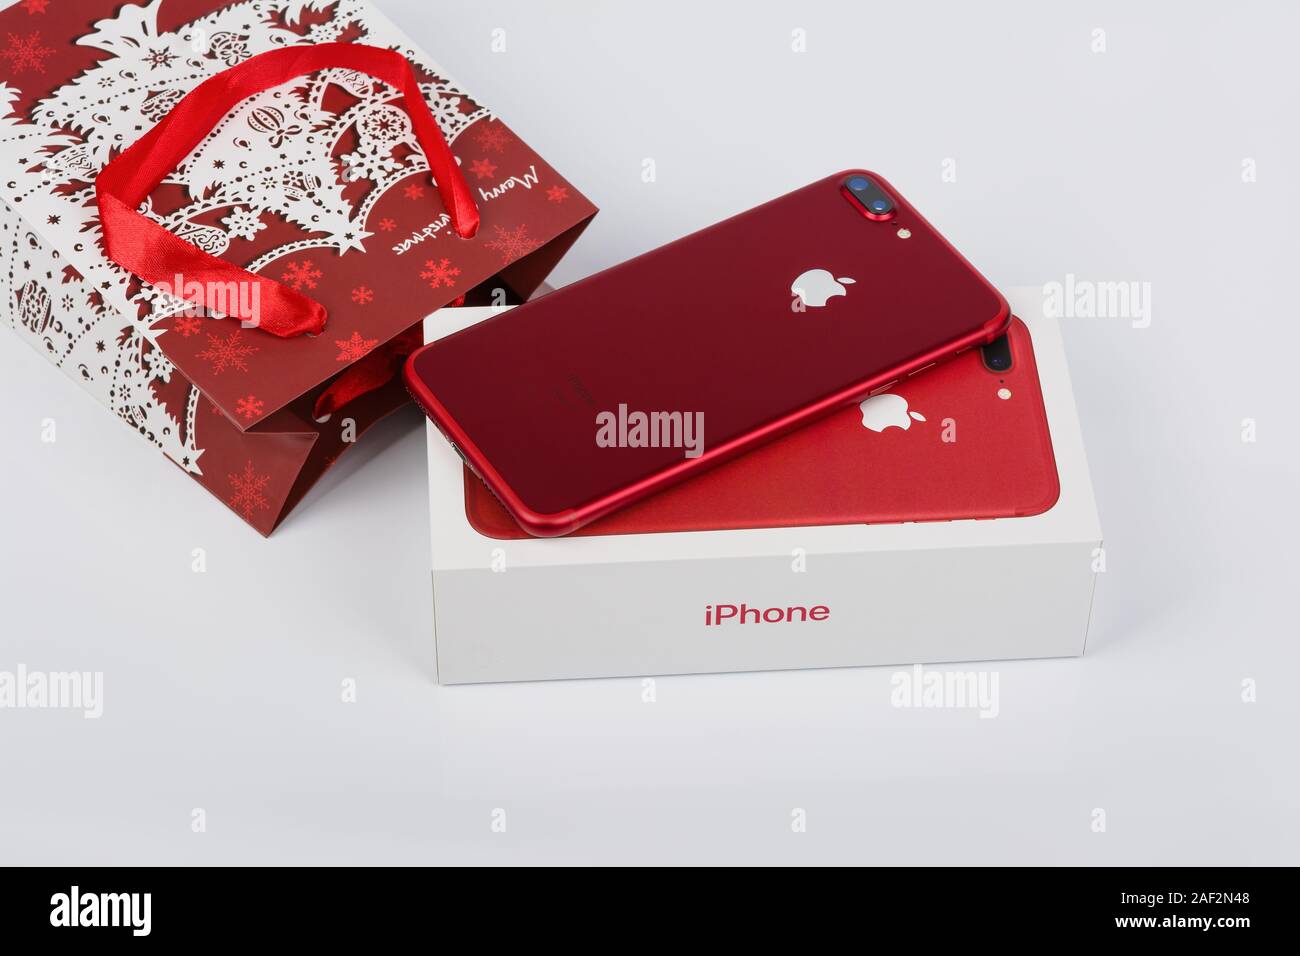 BURGAS, BULGARIA - DECEMBER 10, 2019: Apple iPhone 7 Plus Red Special Edition on white background, back view. Christmas gift. Stock Photo